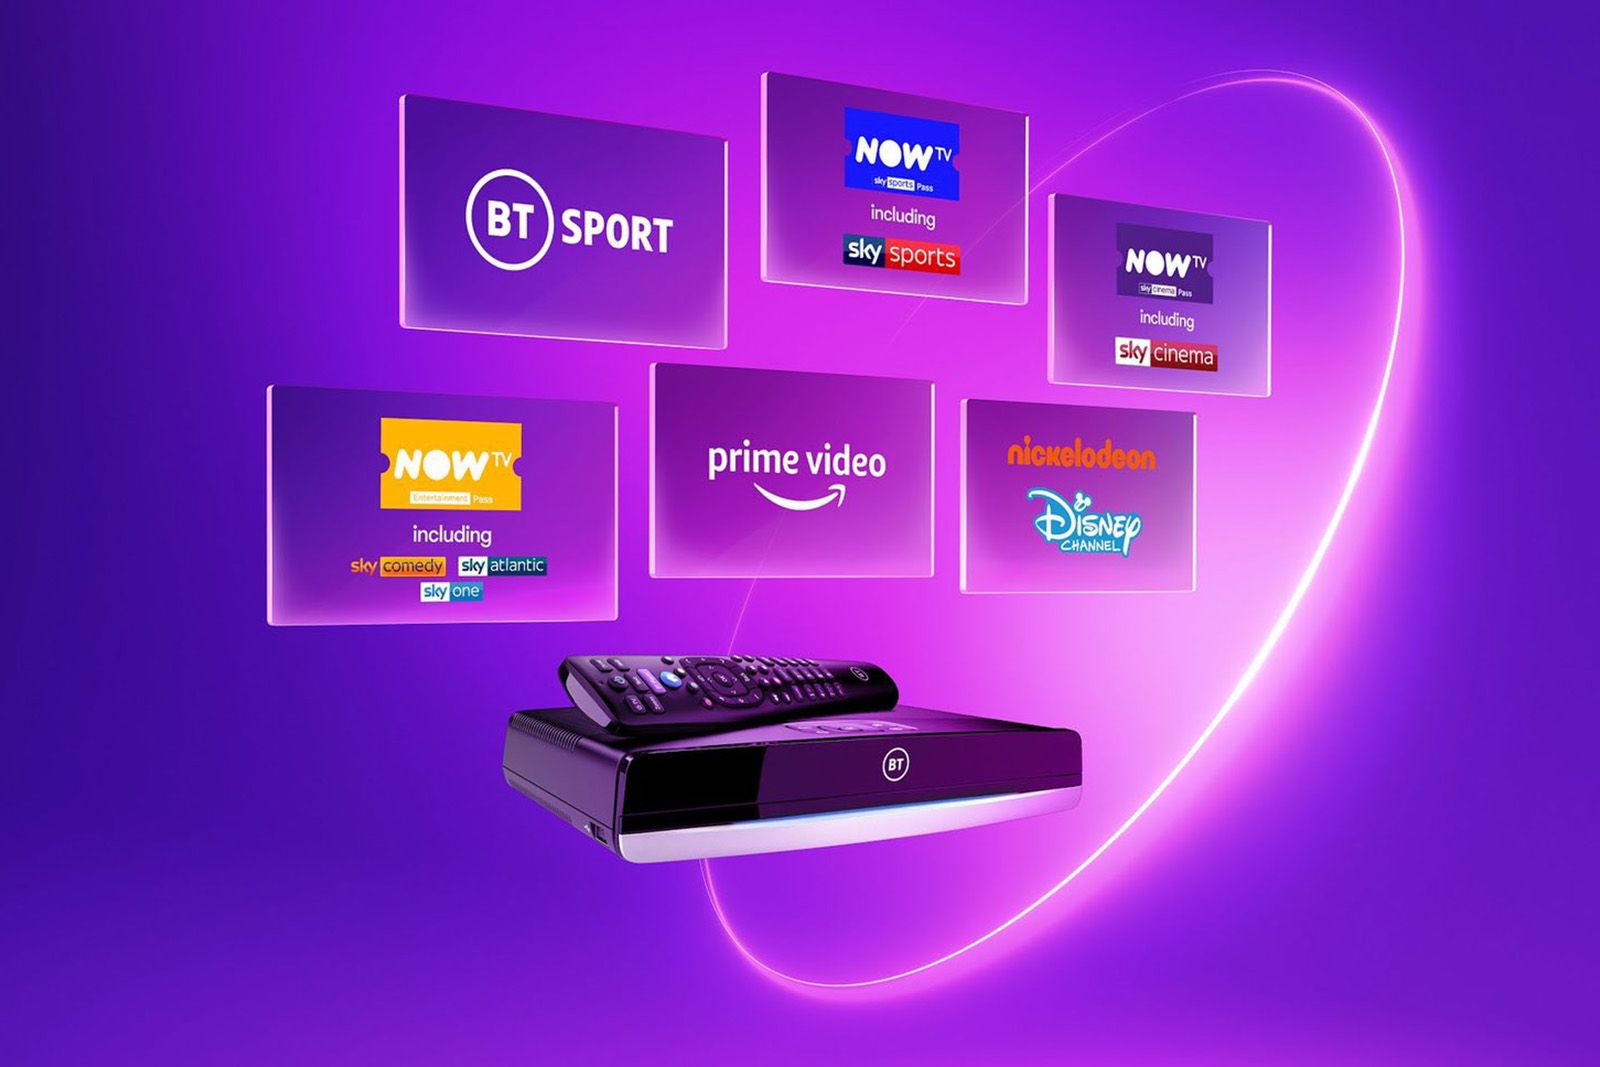 New BT TV packages add Now TV for all of Sky Sports and more